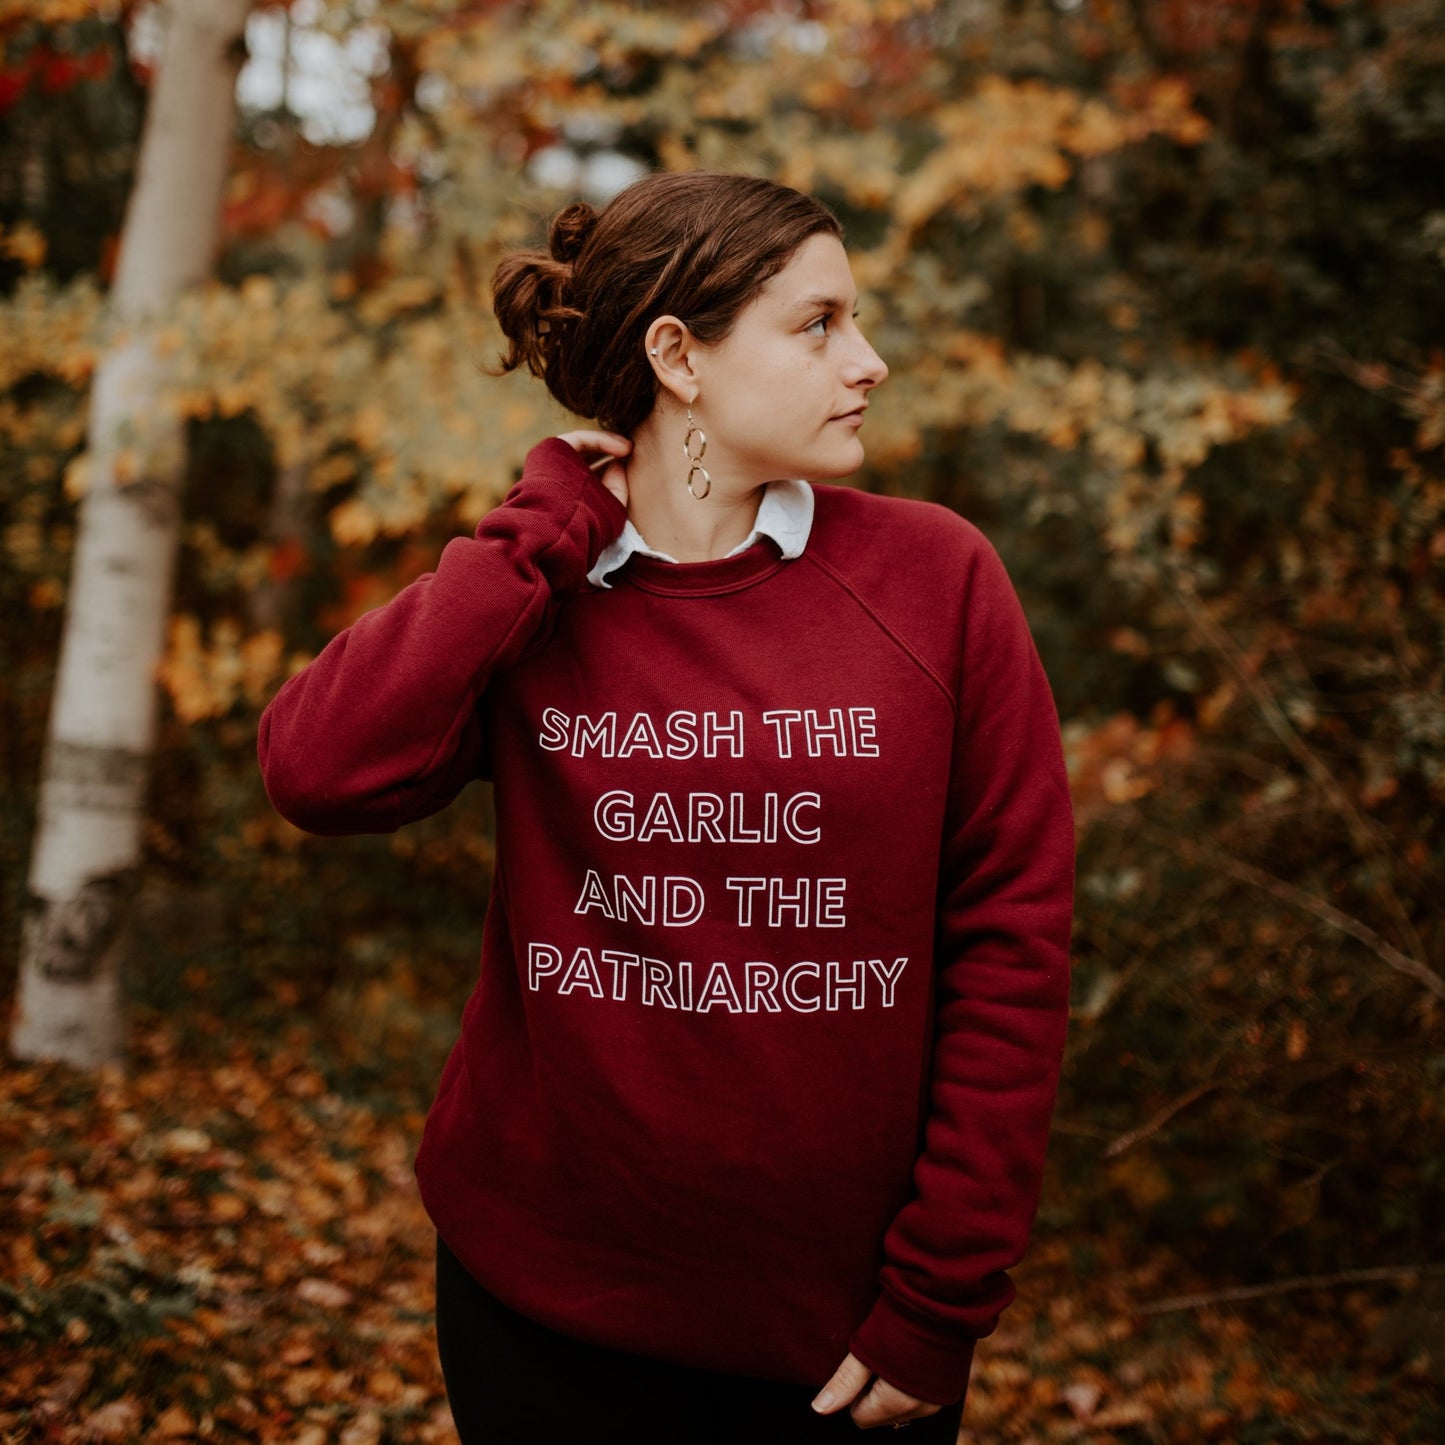 A woman wearing a maroon "Smash the Garlic and the Patriarchy" stands in a colorful forest